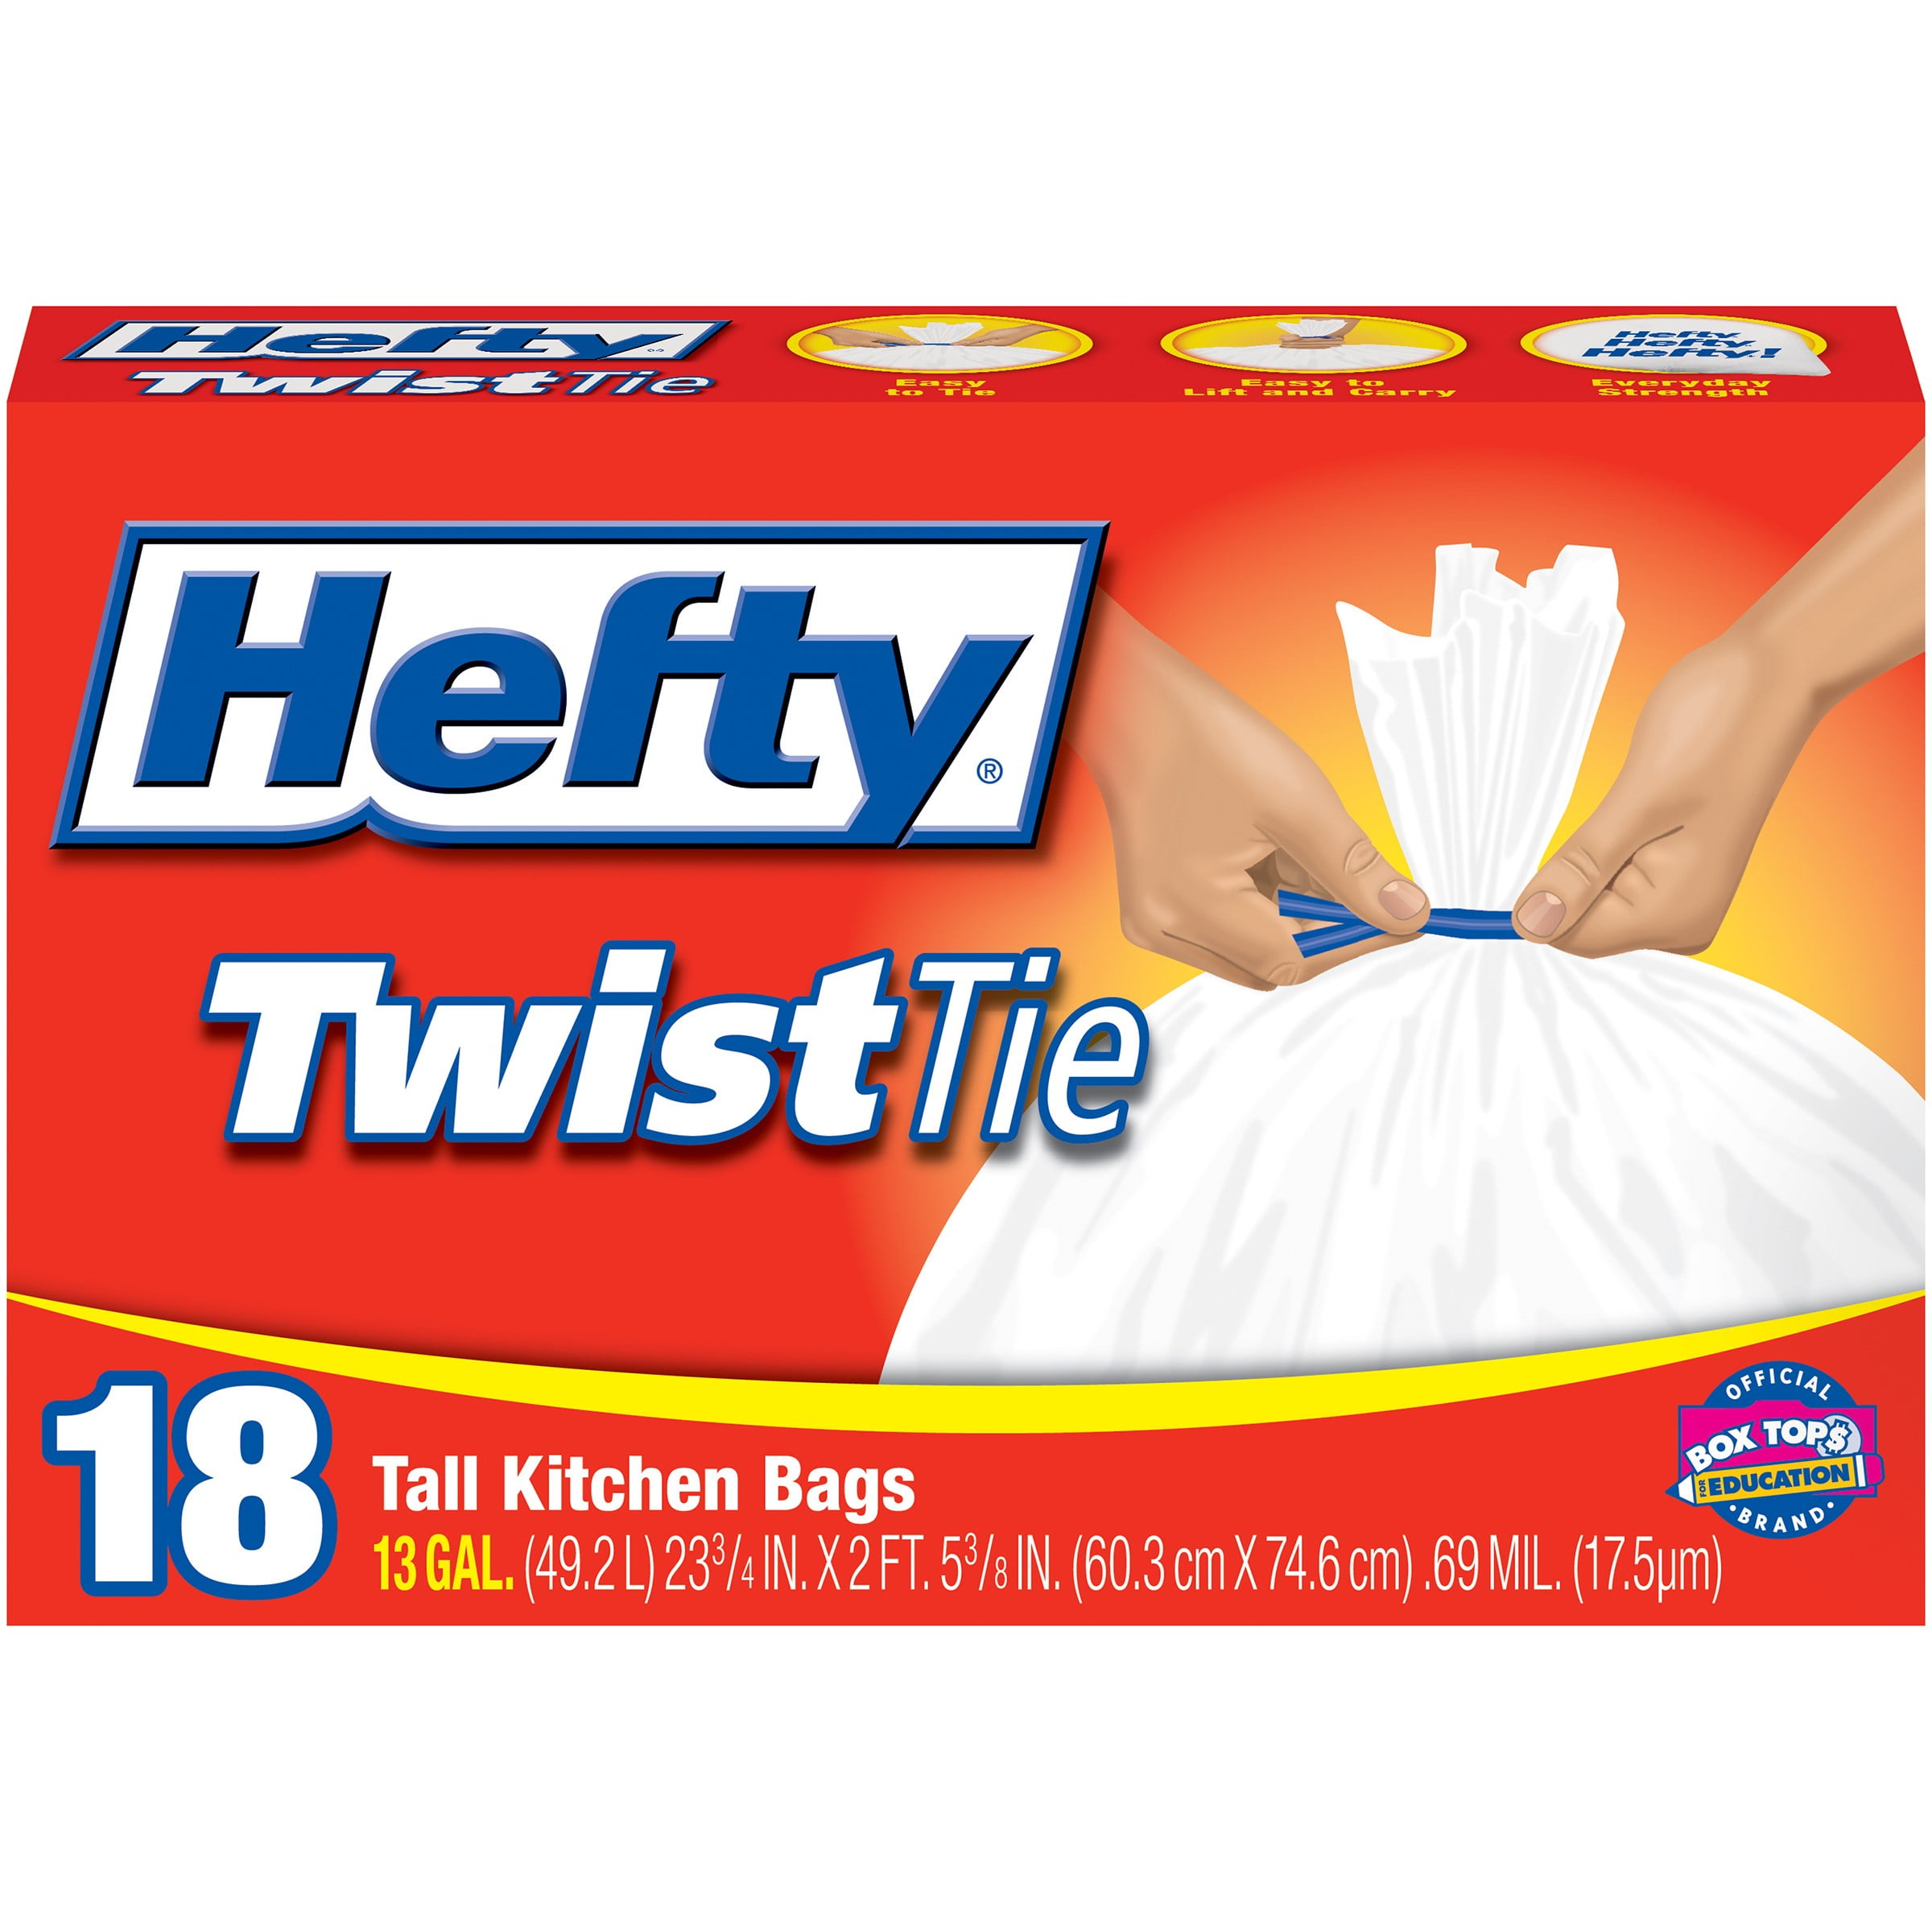  Ultrasac 13 Gallon 0.6 MIL Tall Kitchen Bags With Twist Ties -  24 x 27 - Pack of 120 - For Home, Kitchen, Office, White,  (ULR-TK13G-SC-120C) : Health & Household